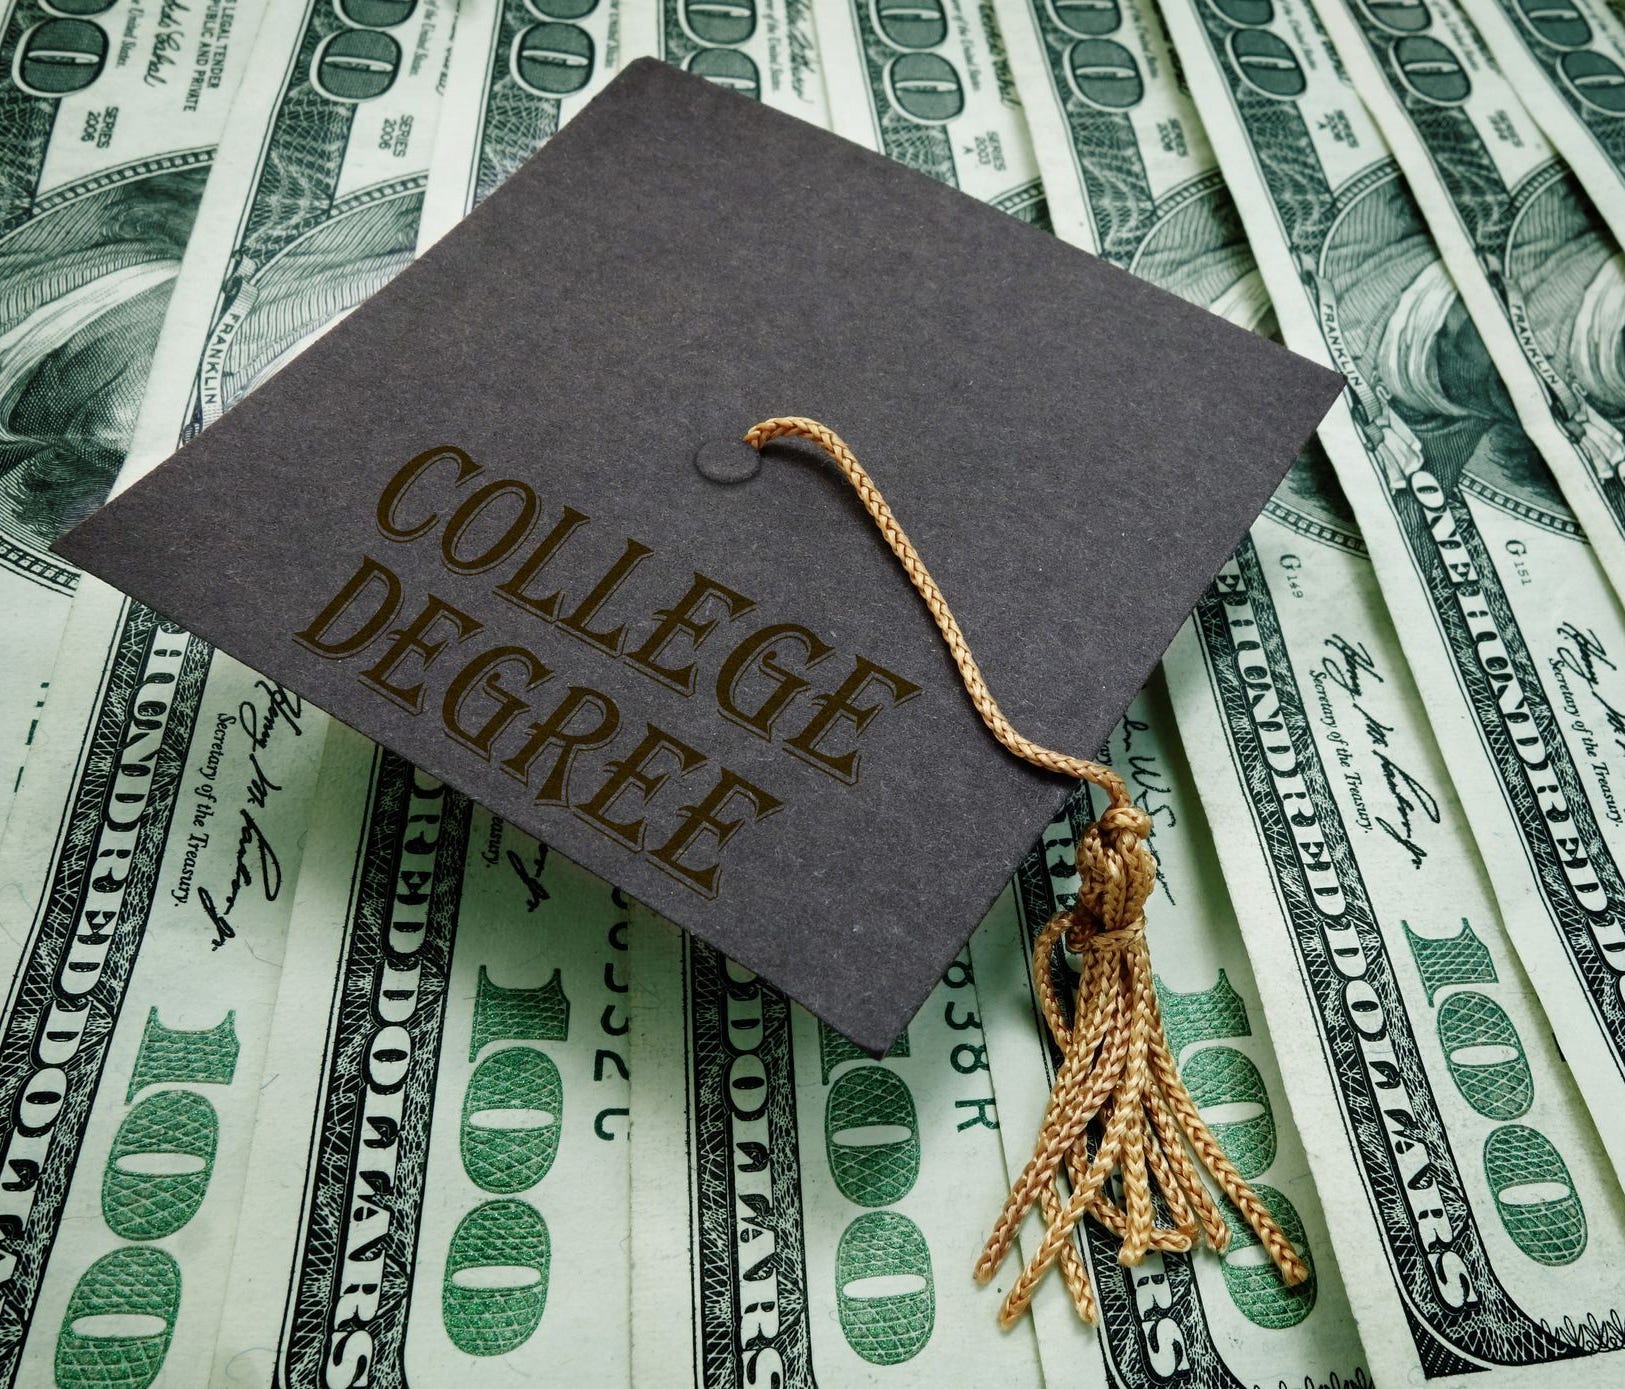 According to their Project on Student Debt, 68% of 2015 bachelor's degree recipients graduated with student loan debt. The average was $30,100 per borrower.